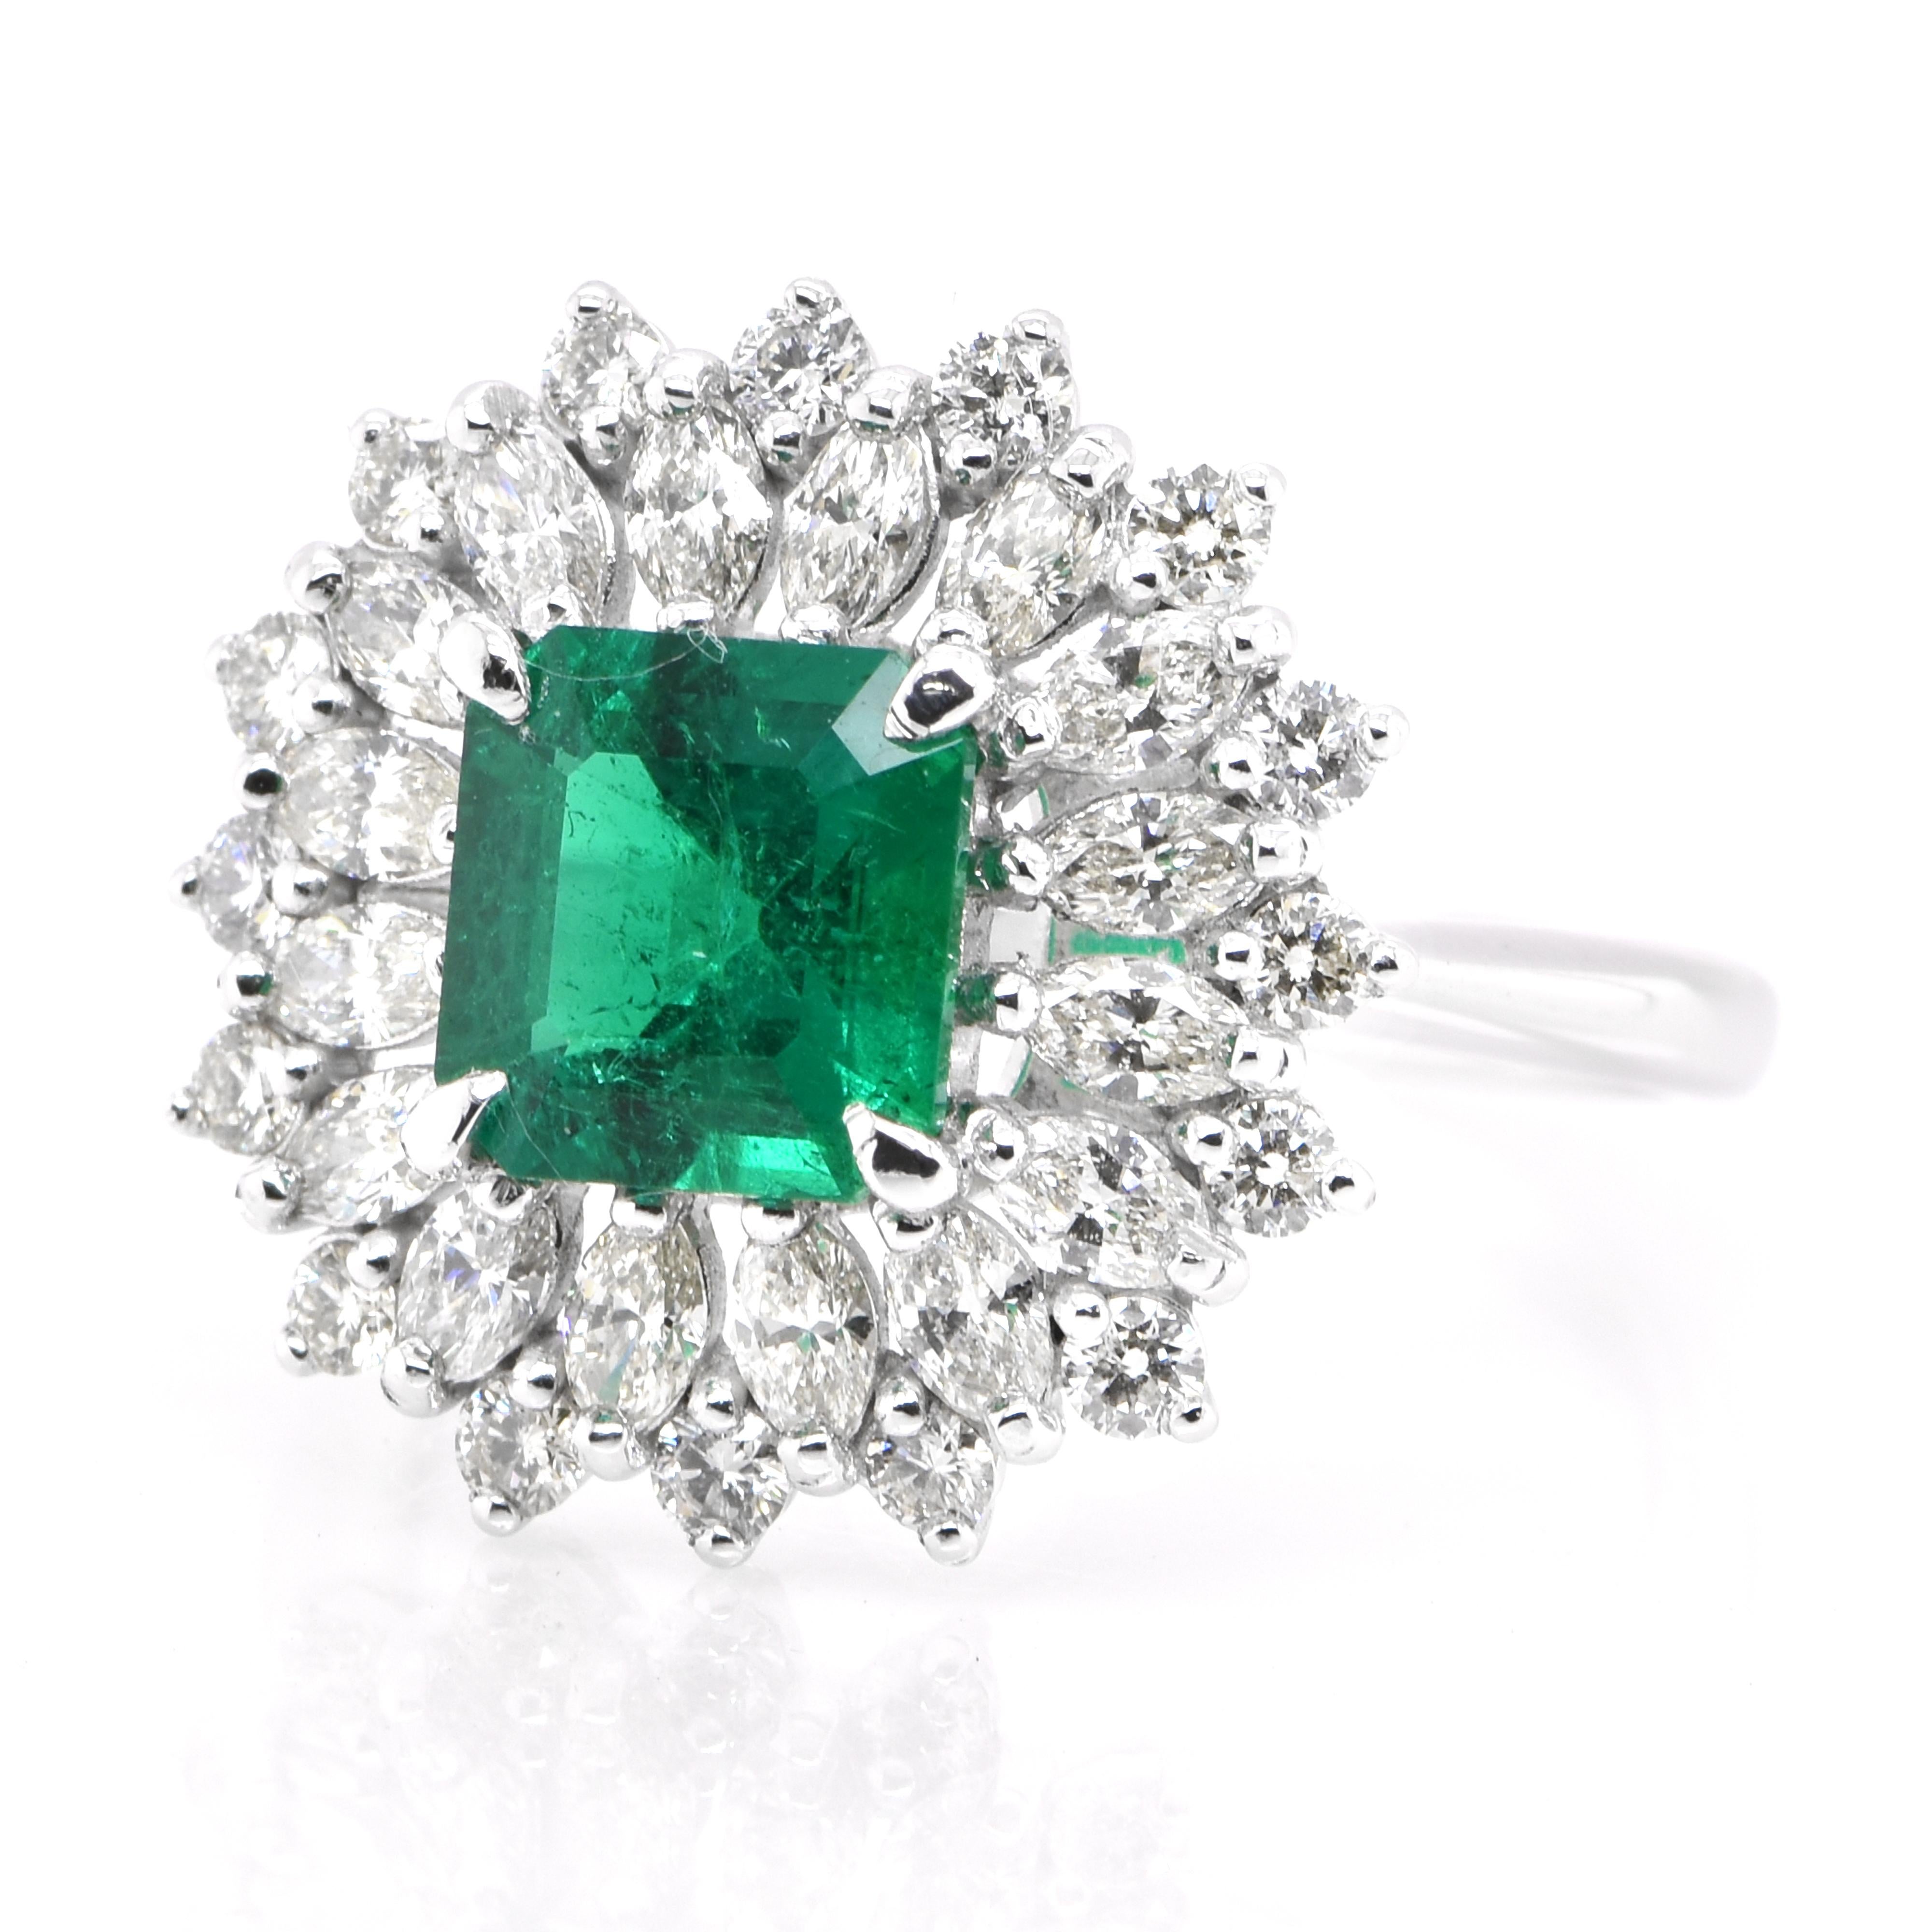 A stunning ring featuring a 1.51 Carat Natural Emerald and 1.15 Carats of Diamond Accents set in Platinum. People have admired emerald’s green for thousands of years. Emeralds have always been associated with the lushest landscapes and the richest